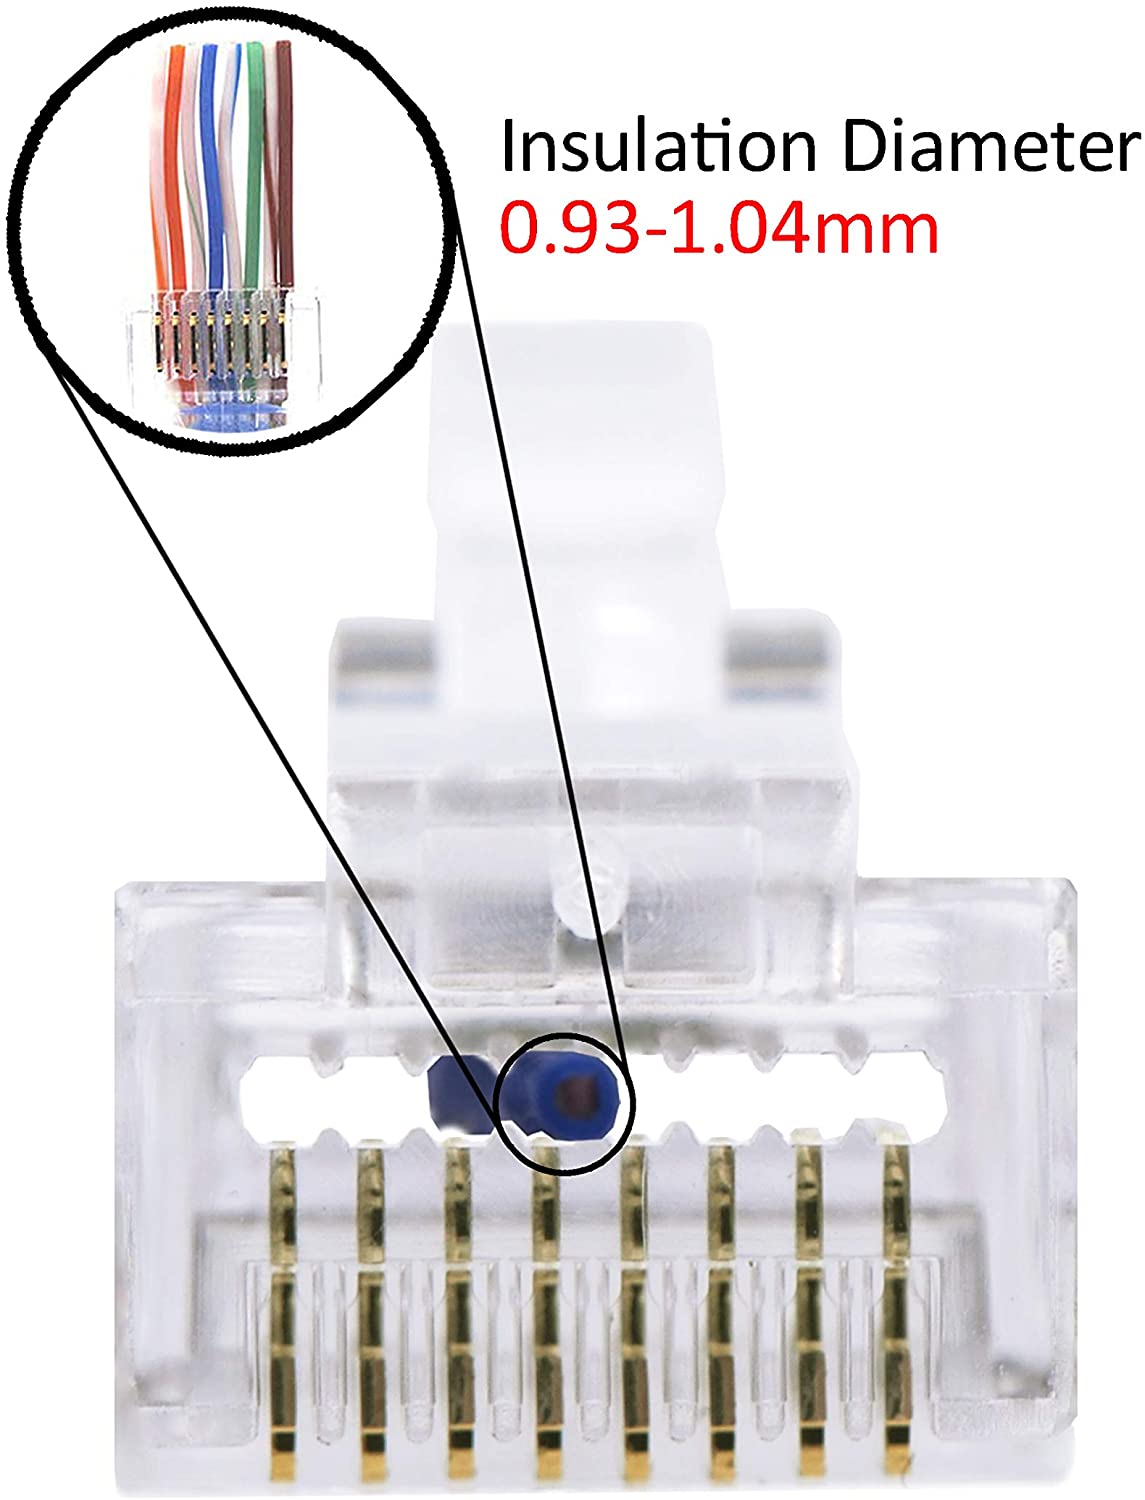 HF-CAT6100SC: RJ45 CAT6 Pass-Through Shielded Networking Cable Connector(100pcs/small box) - Click Image to Close